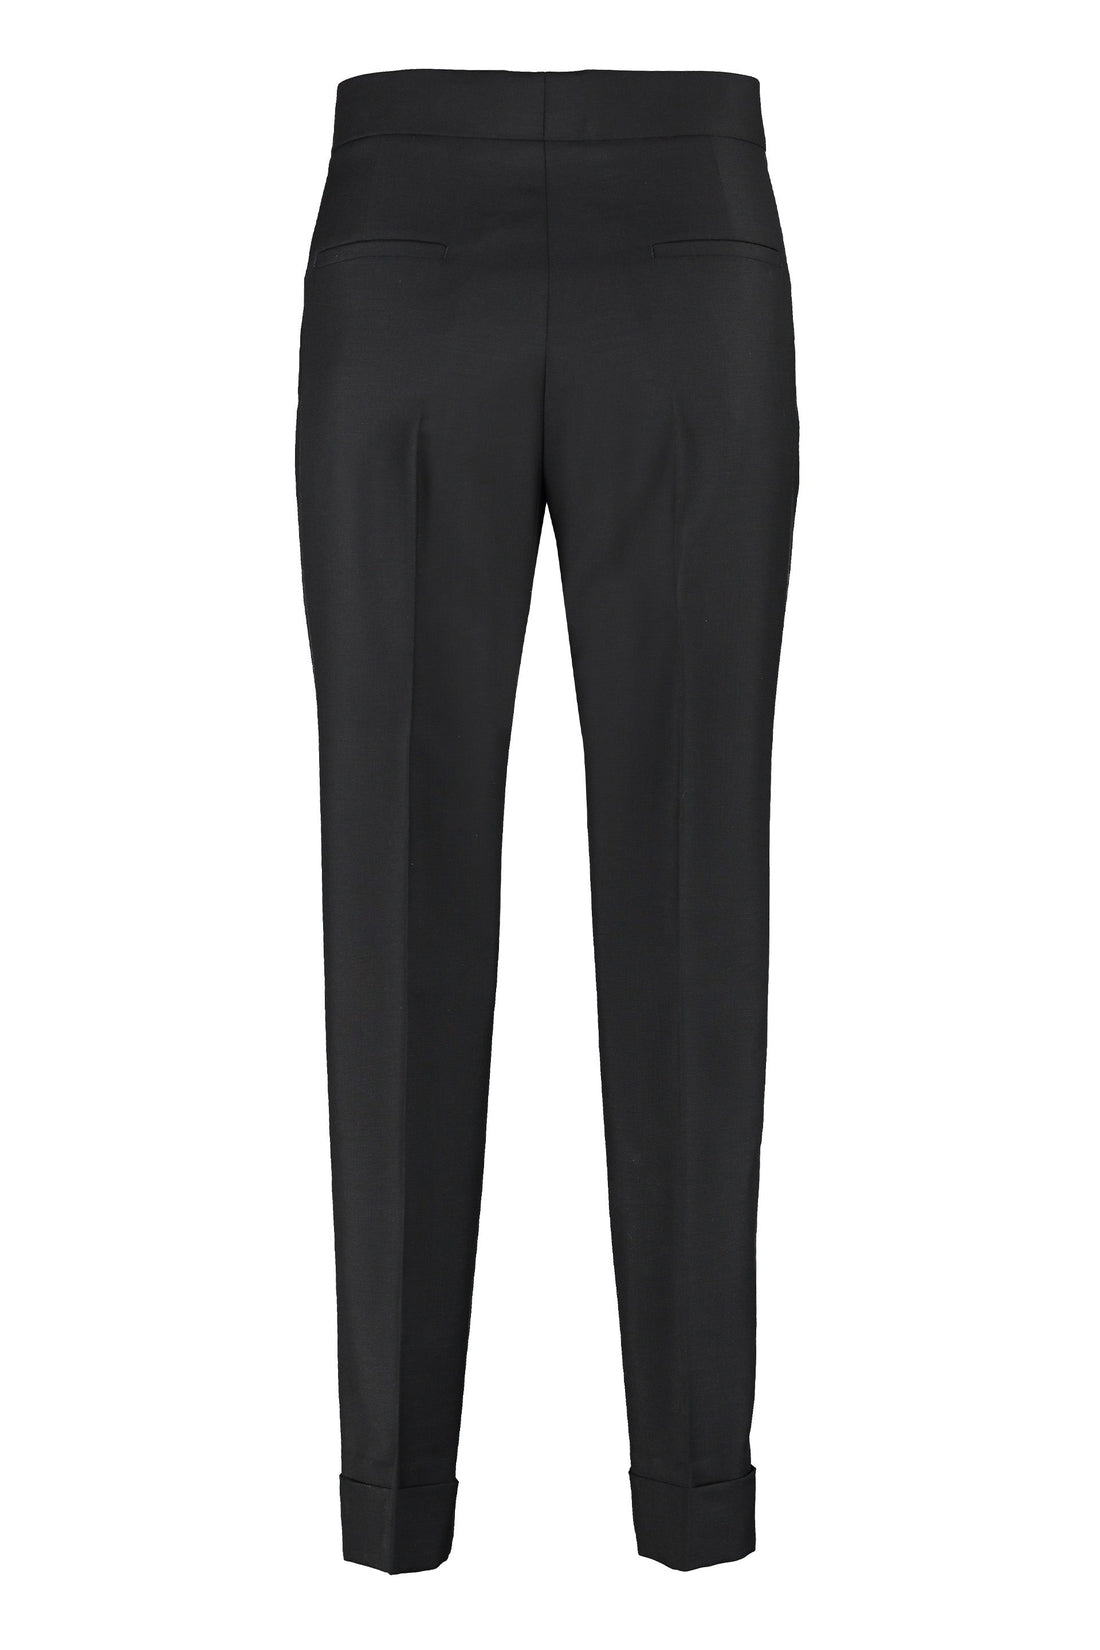 Givenchy-OUTLET-SALE-Wool blend slim fit tailored trousers-ARCHIVIST